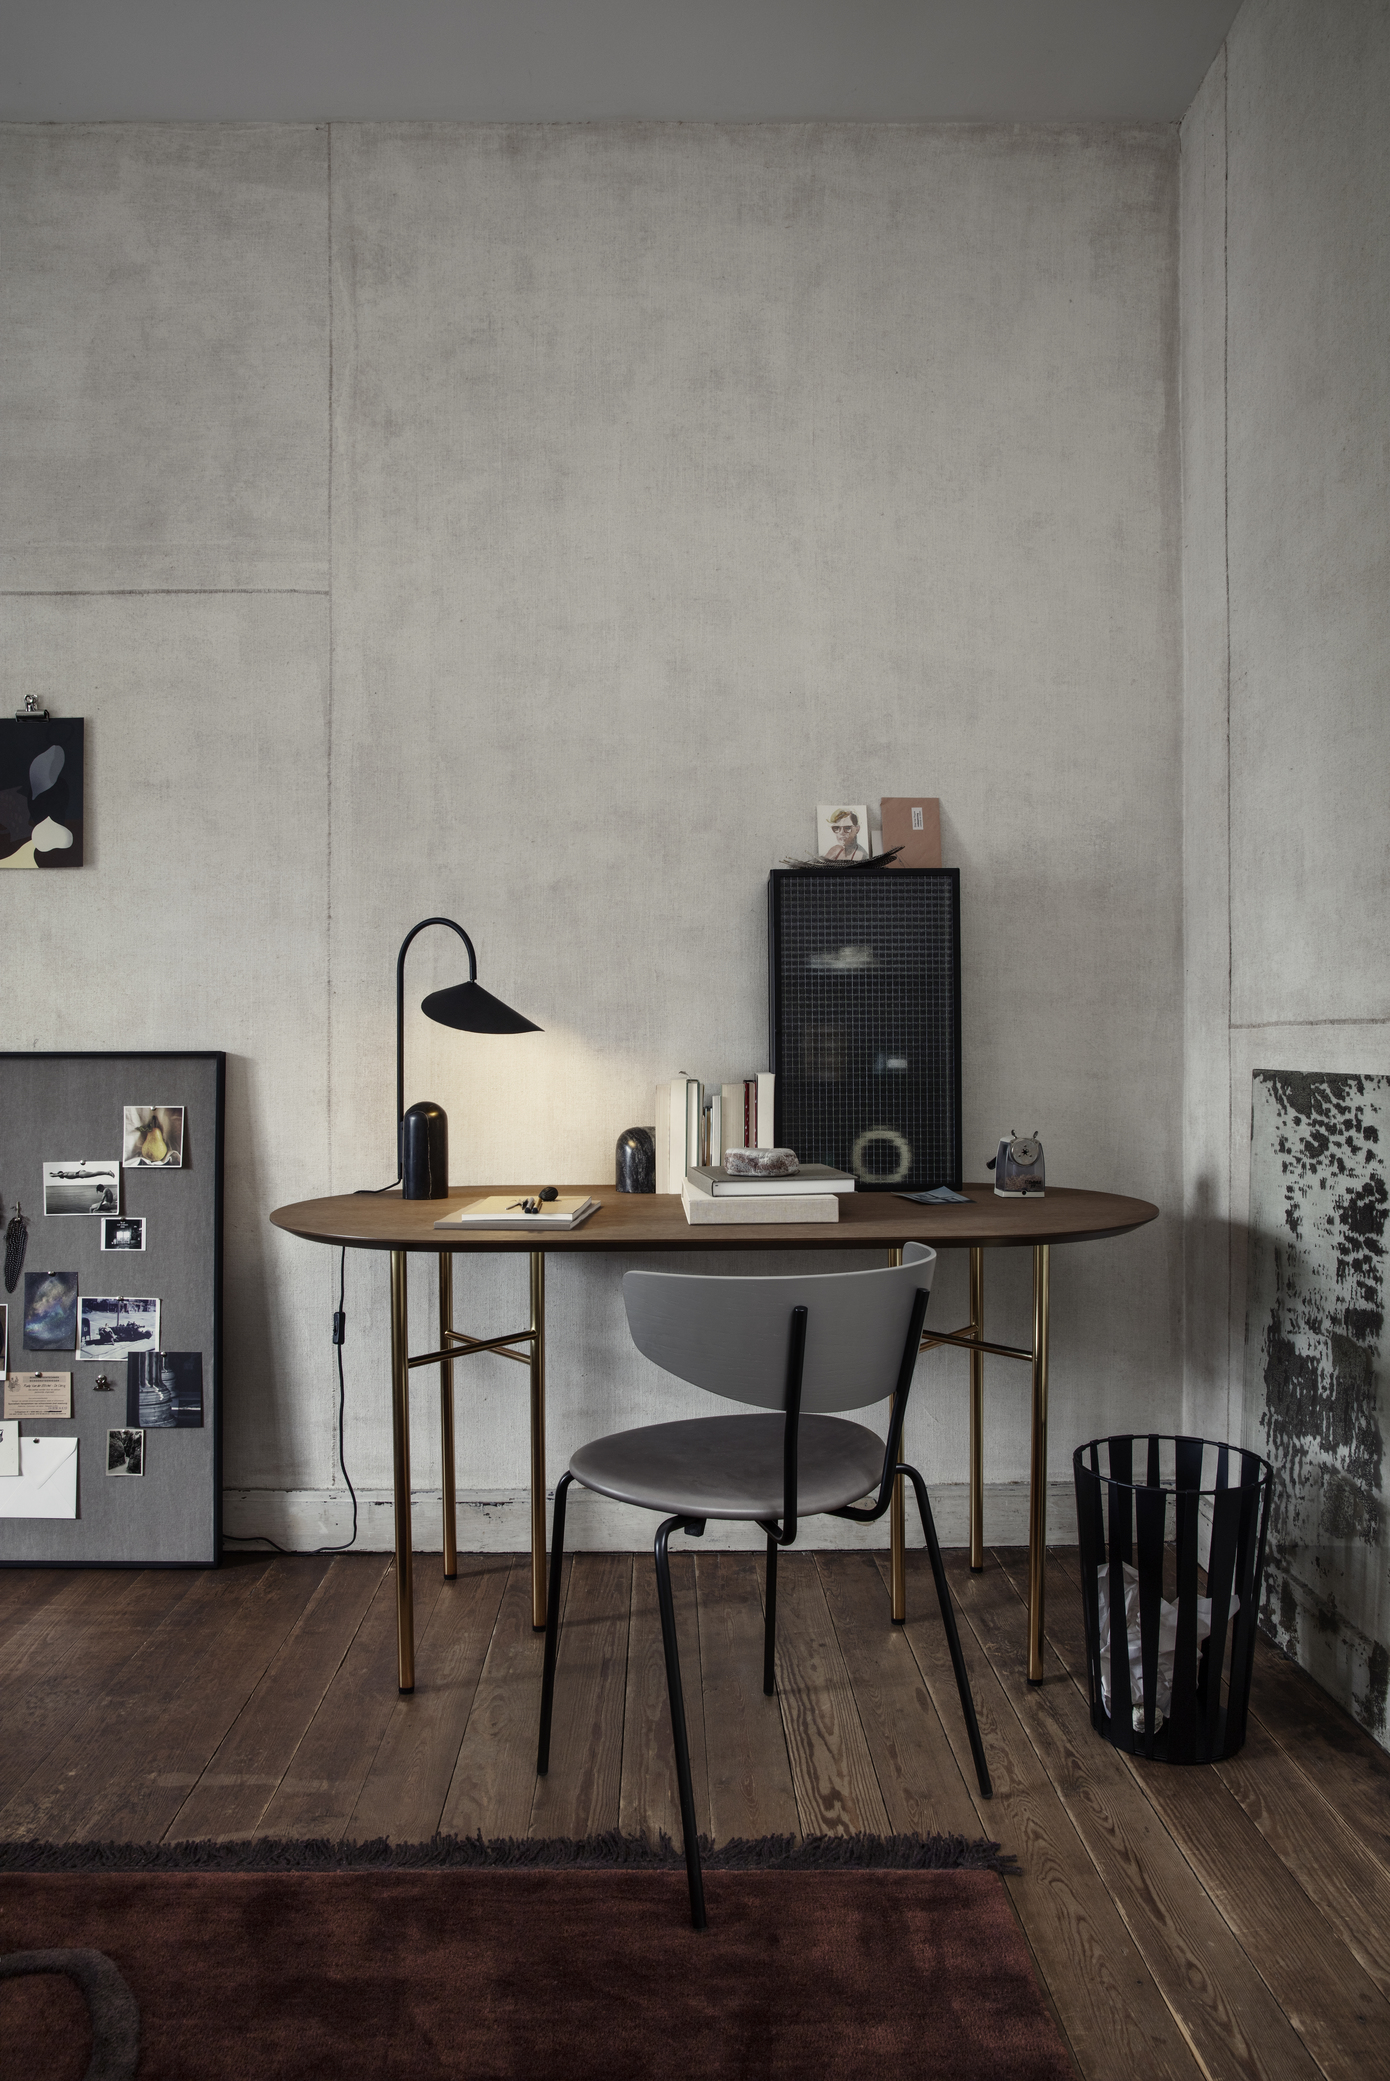 Ferm Living S/S19 collection 